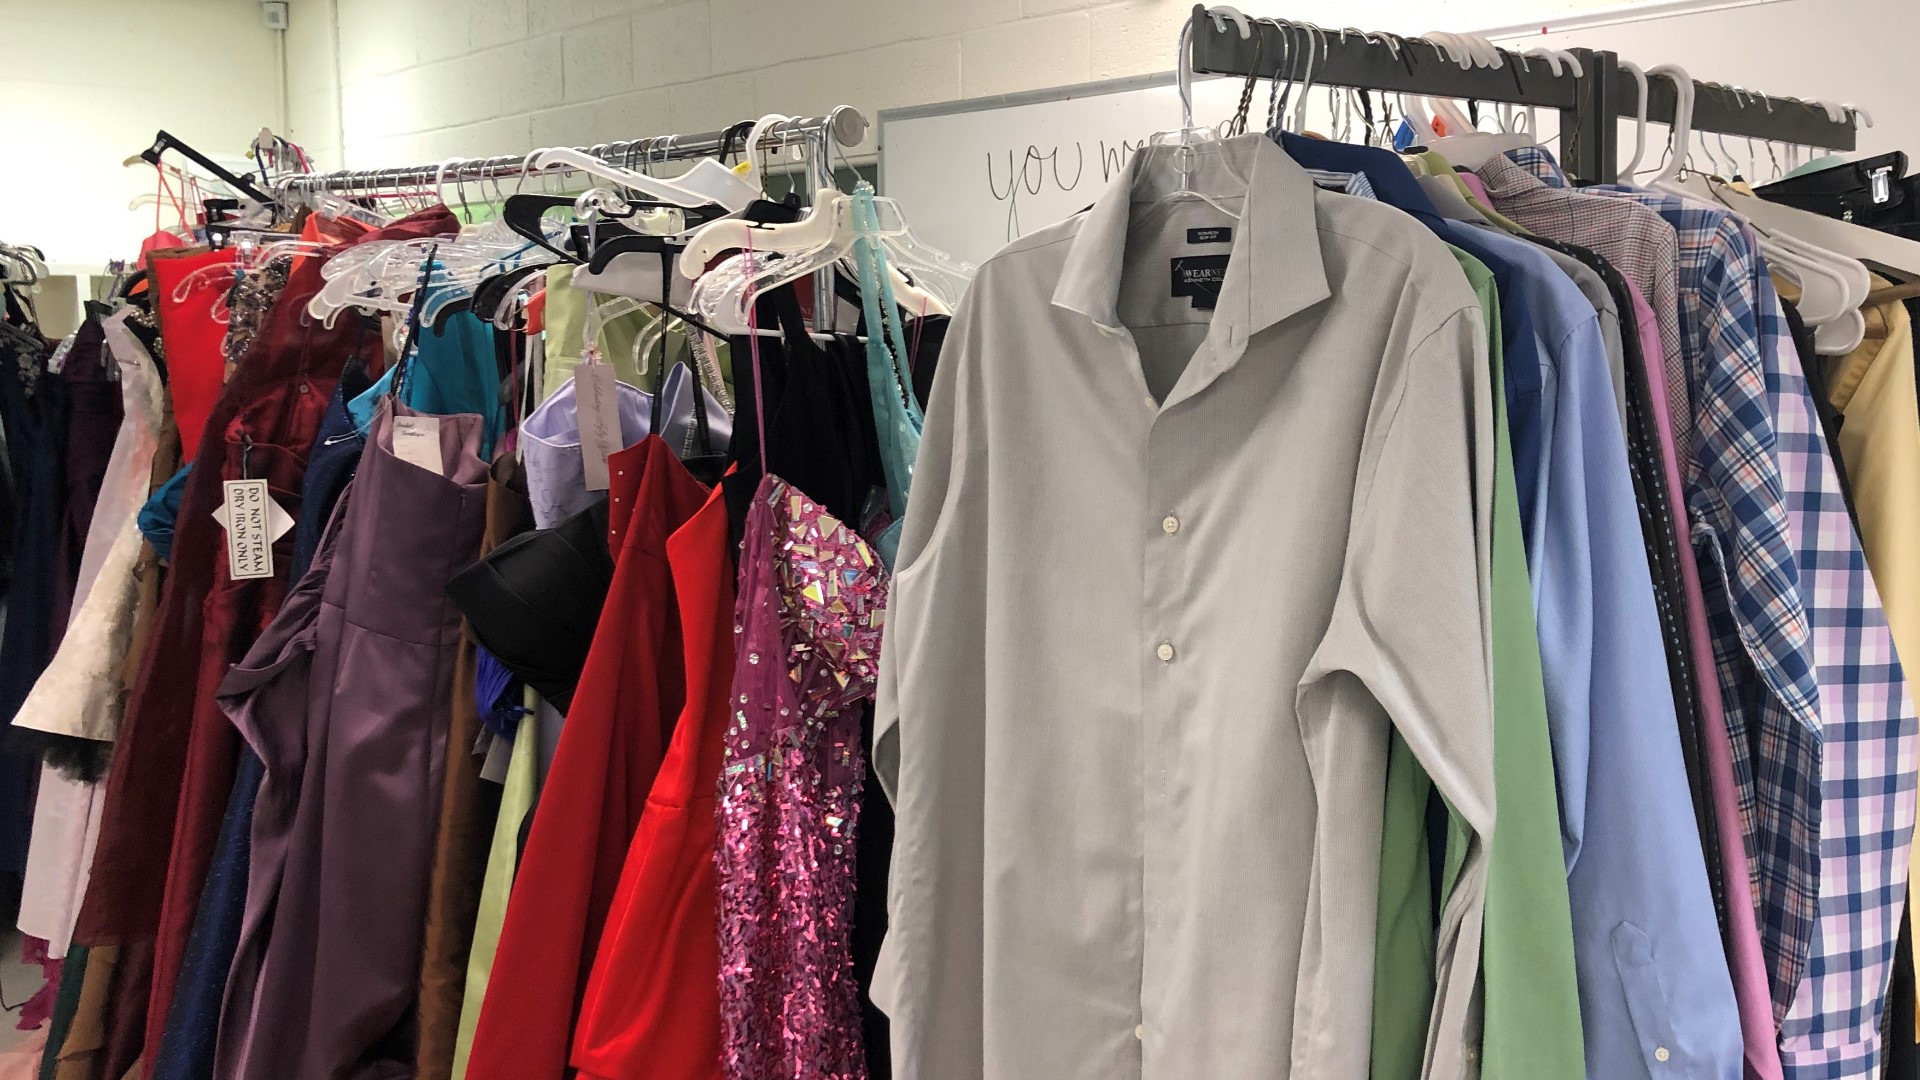 G.W. Carver Middle School in Waco is hosting a prom suits drive Tuesday and Thursday from 4 to 6 p.m. Maria Aguilera reports.